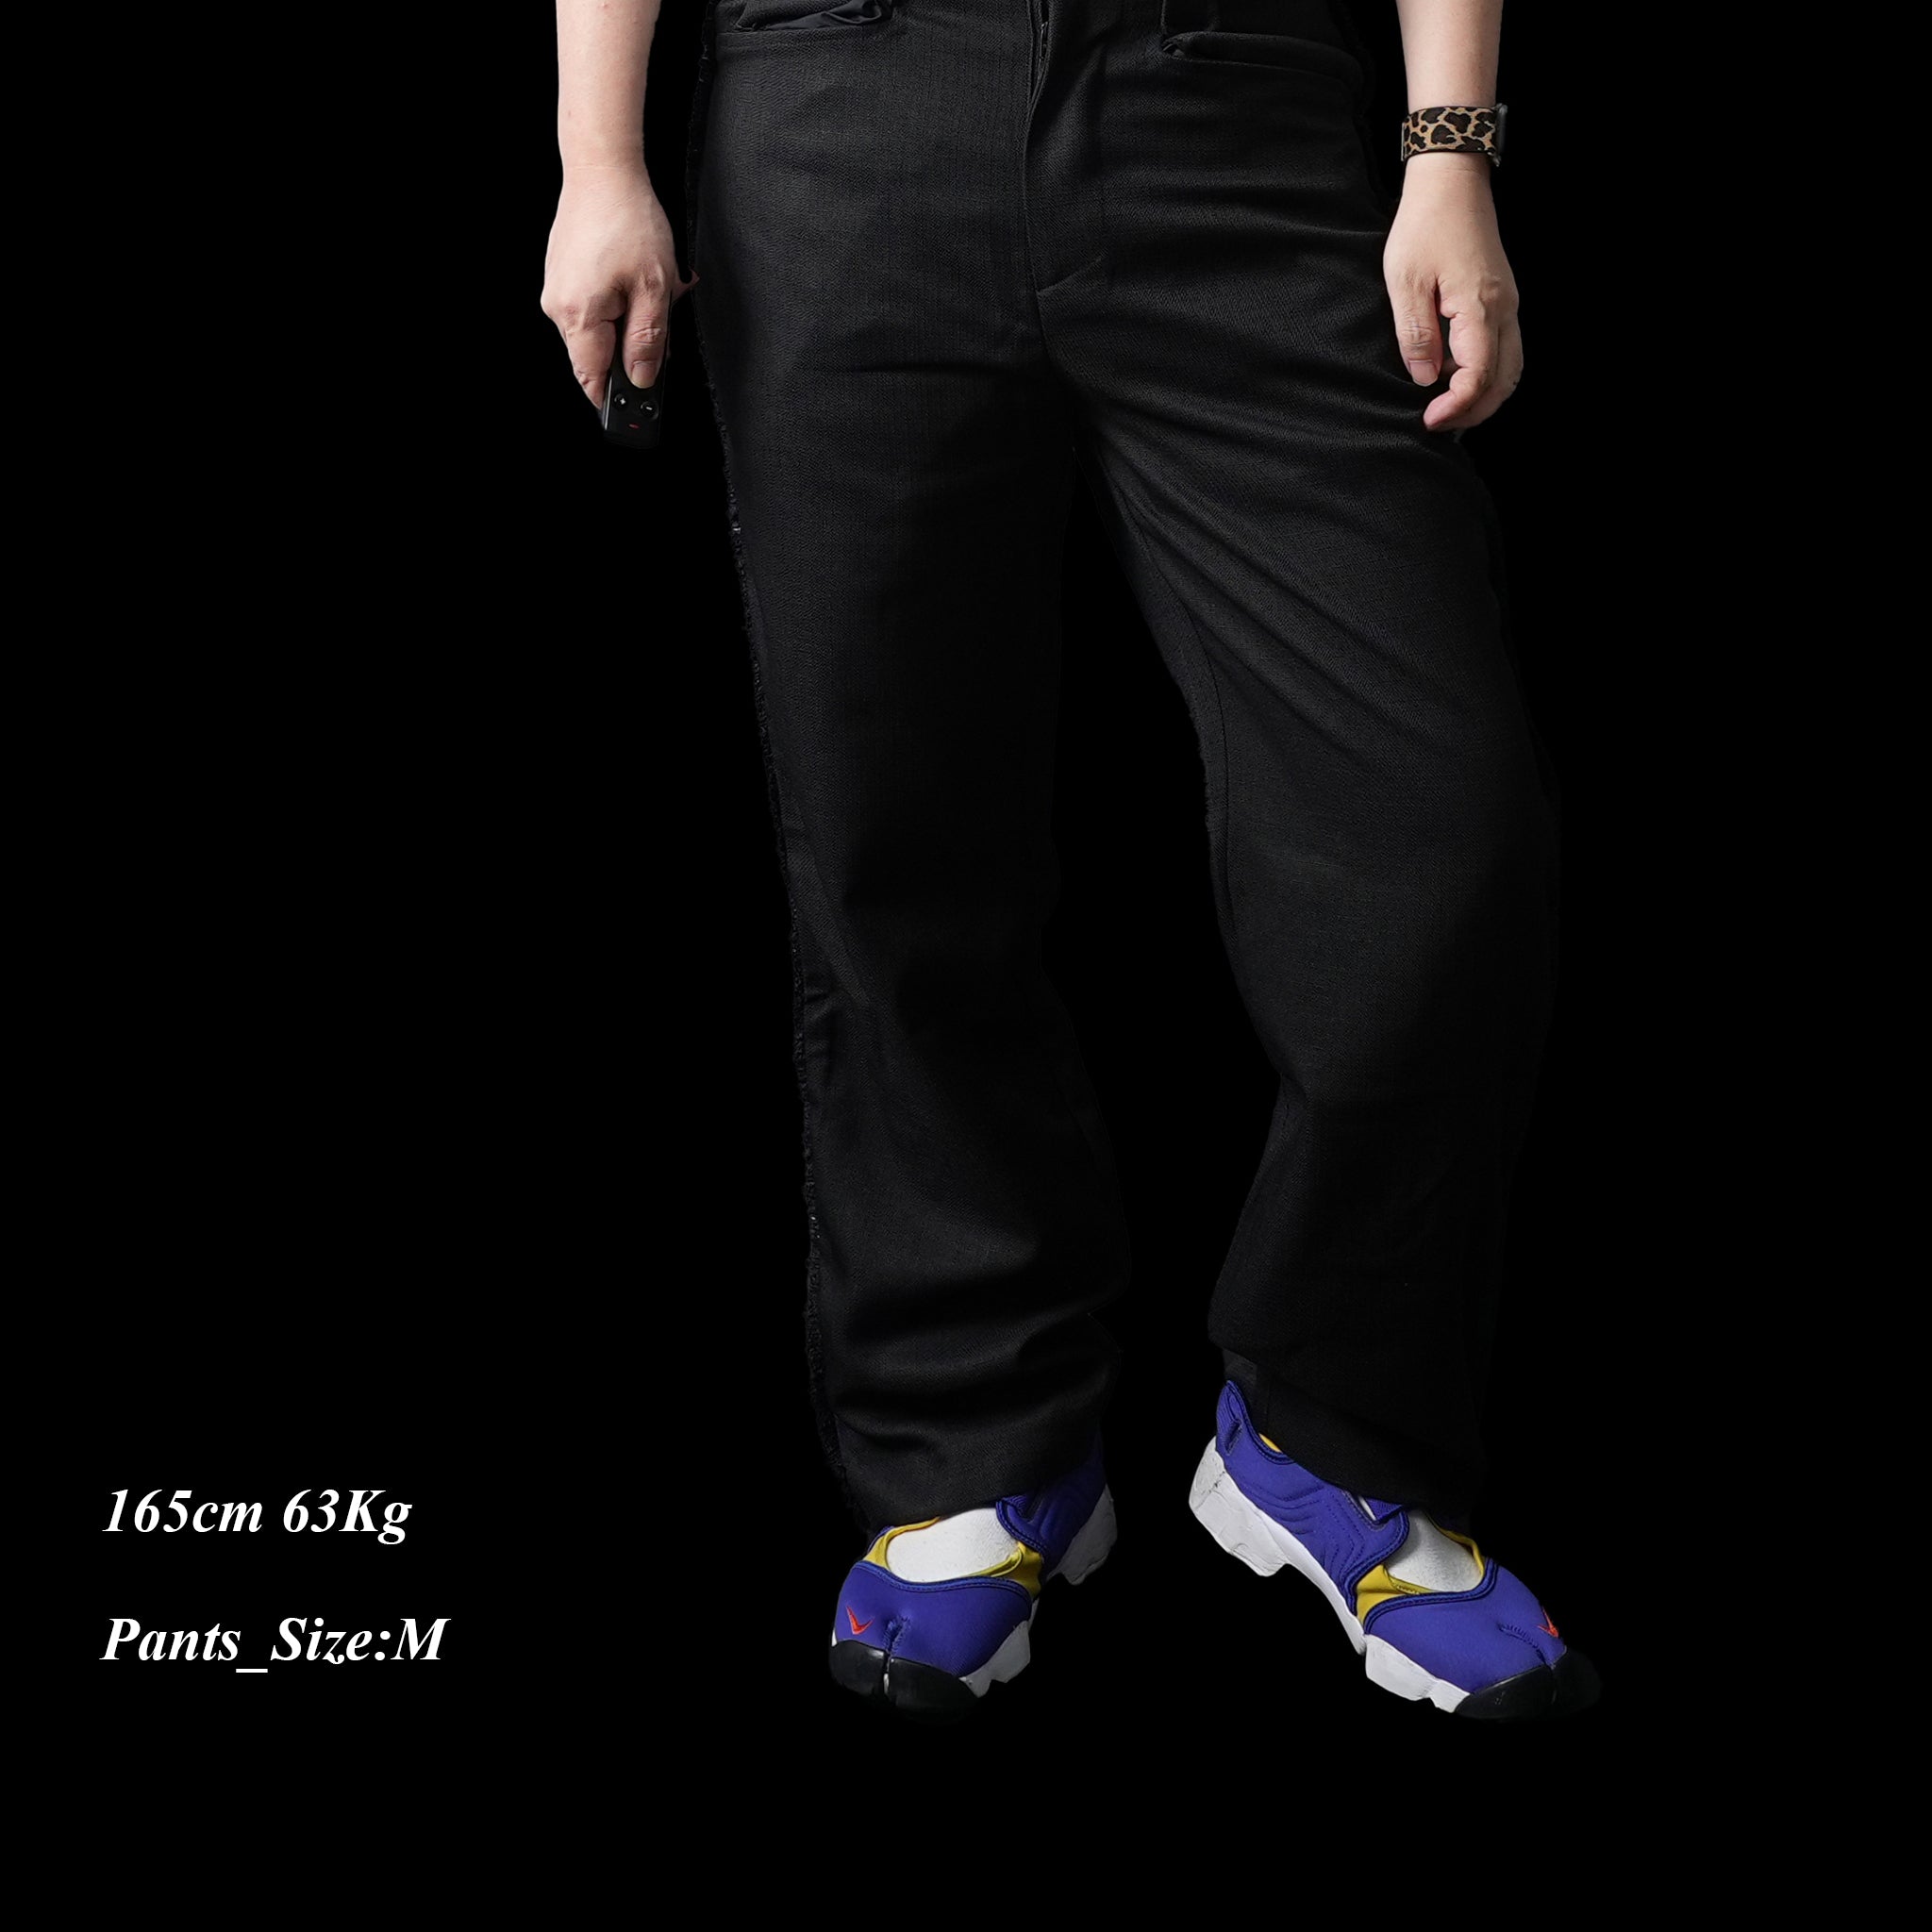 No:28SM00TRM022BLK | Name:Cory Fray Trousers | Color:Black【SISTER JANE_シスタージェーン】